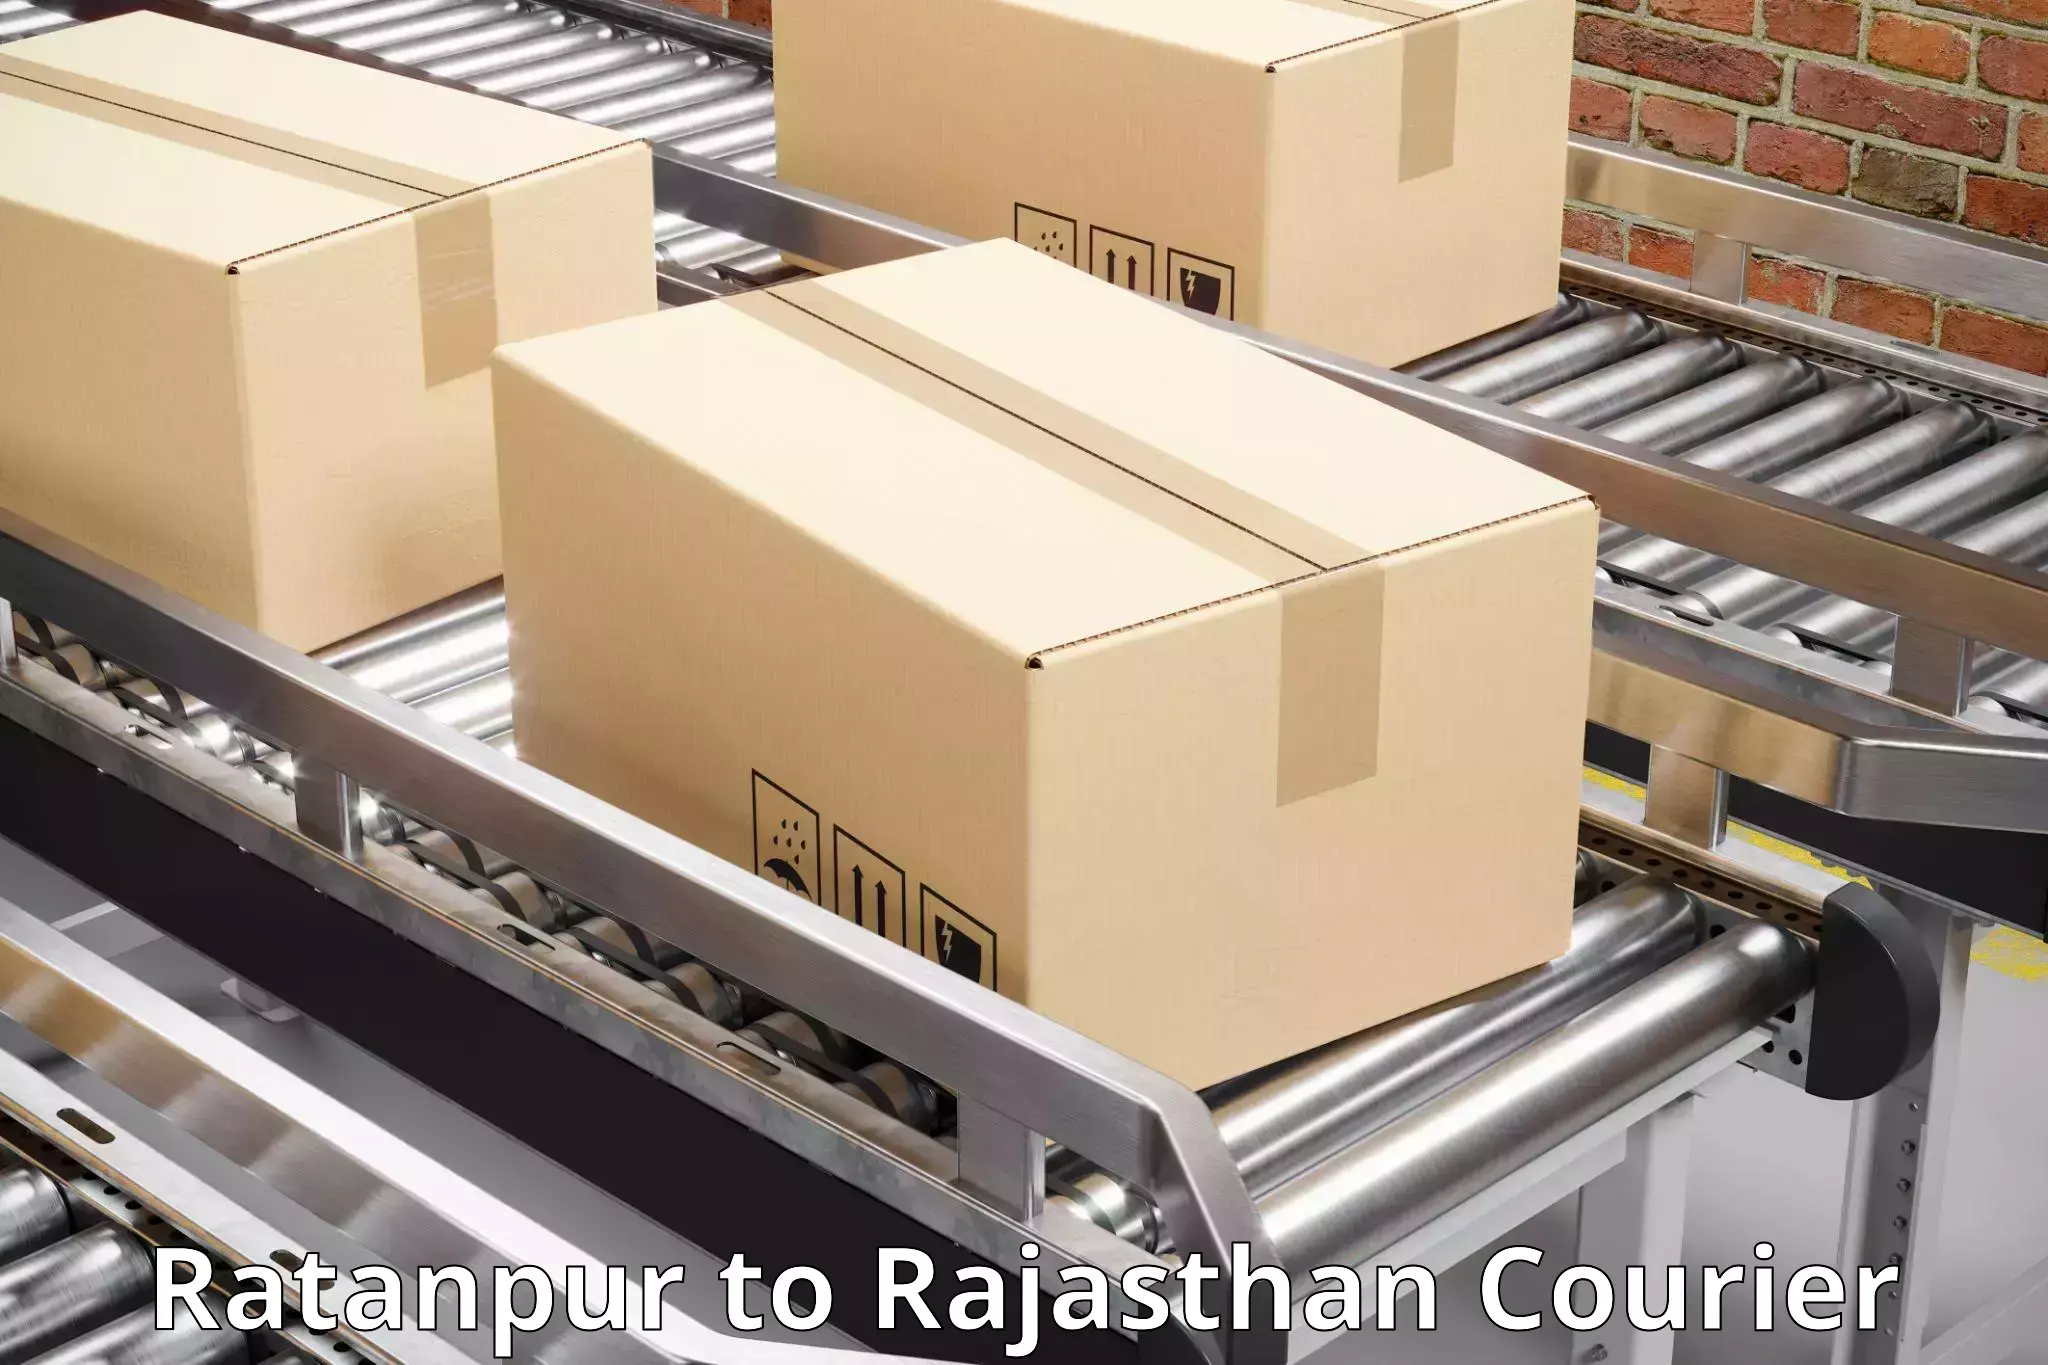 Full-service courier options Ratanpur to Ghatol